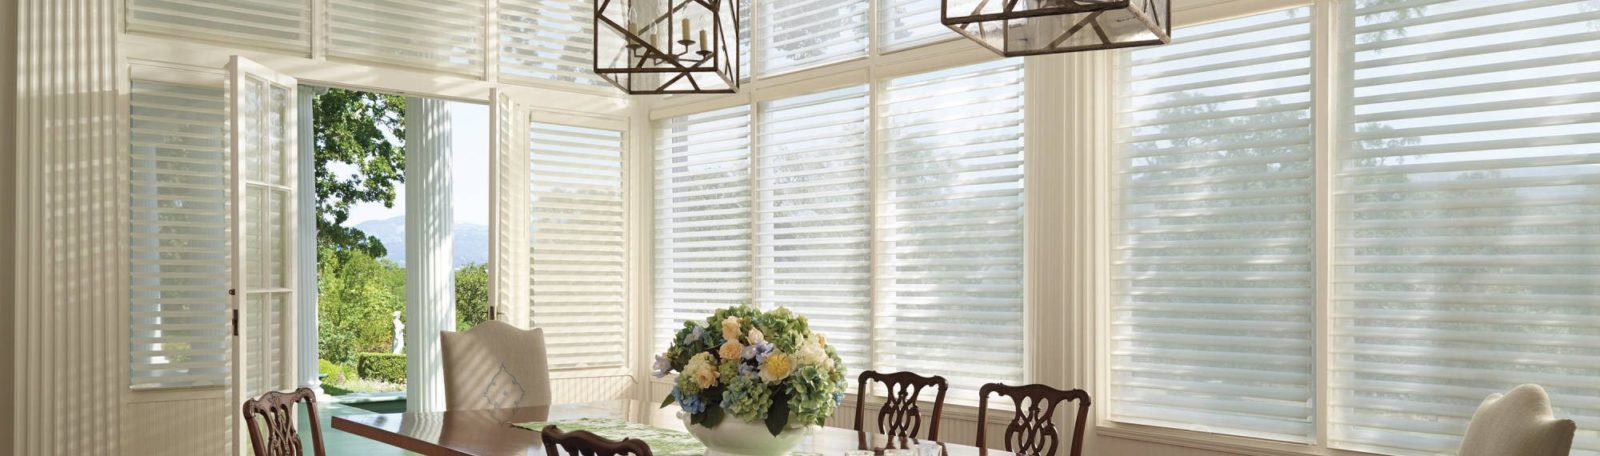 Silhouette window shades dining room